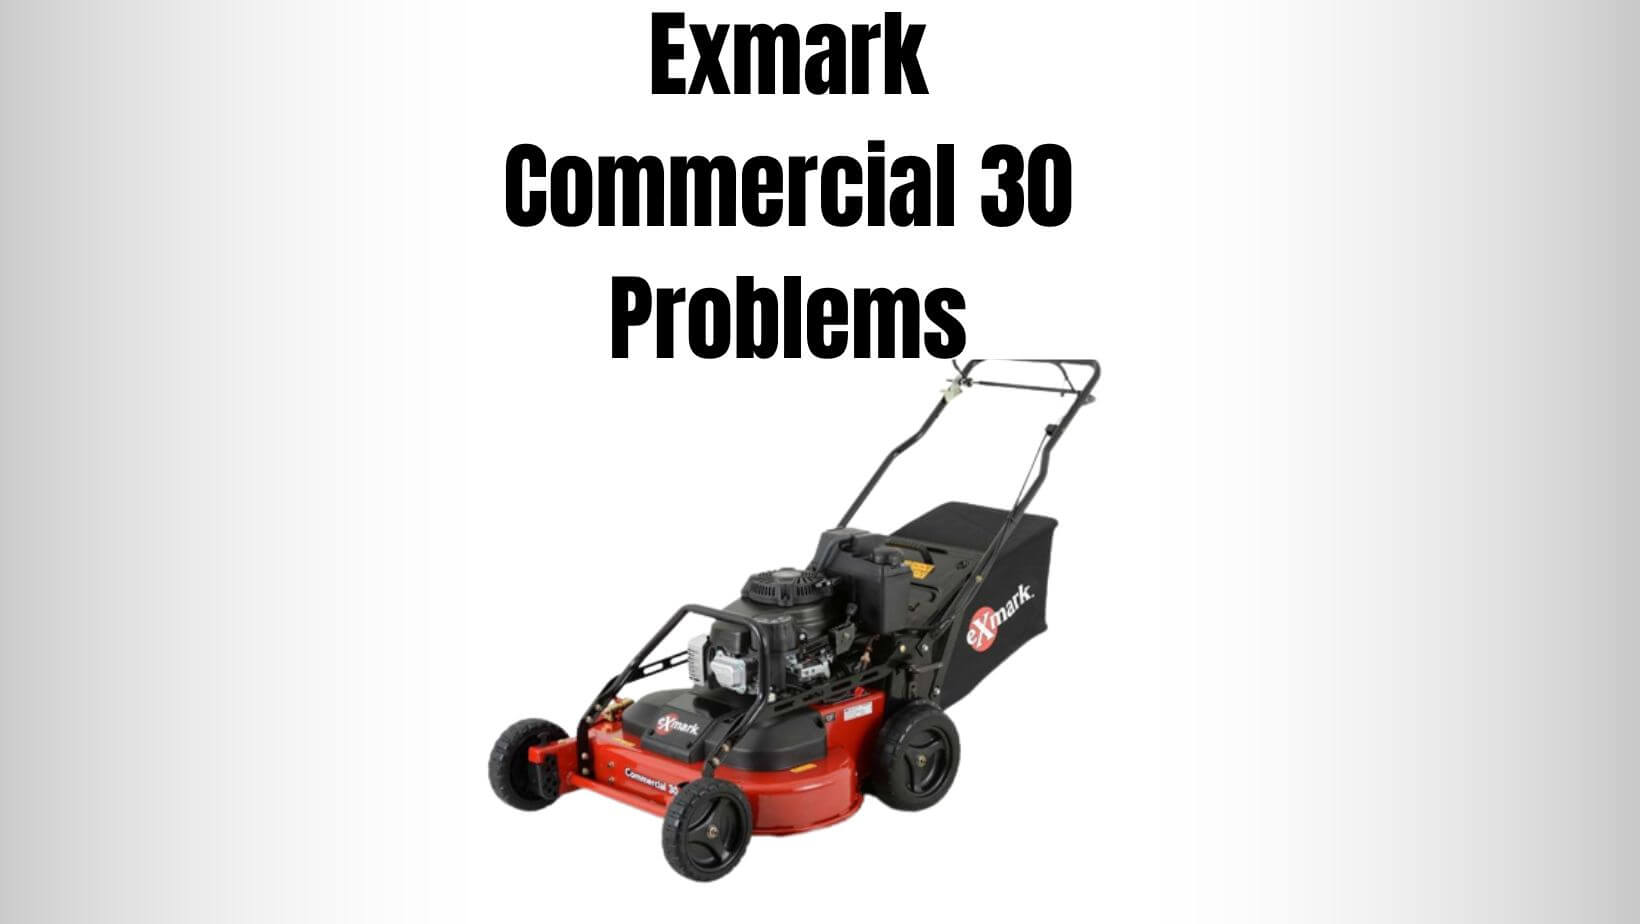 Exmark Commercial 30 Problems